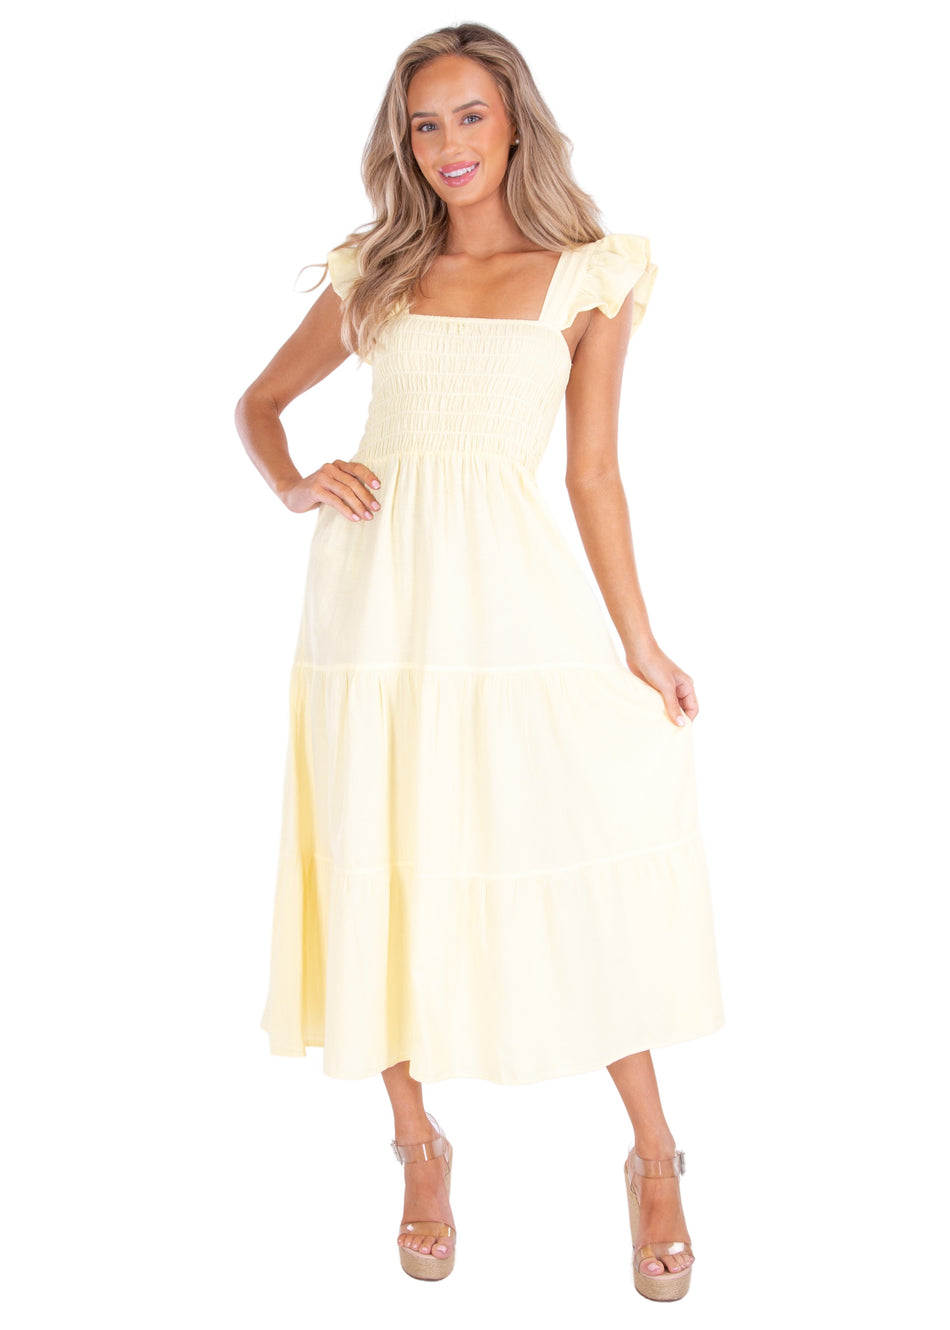 NW1539 - Baby Yellow Cotton Dress